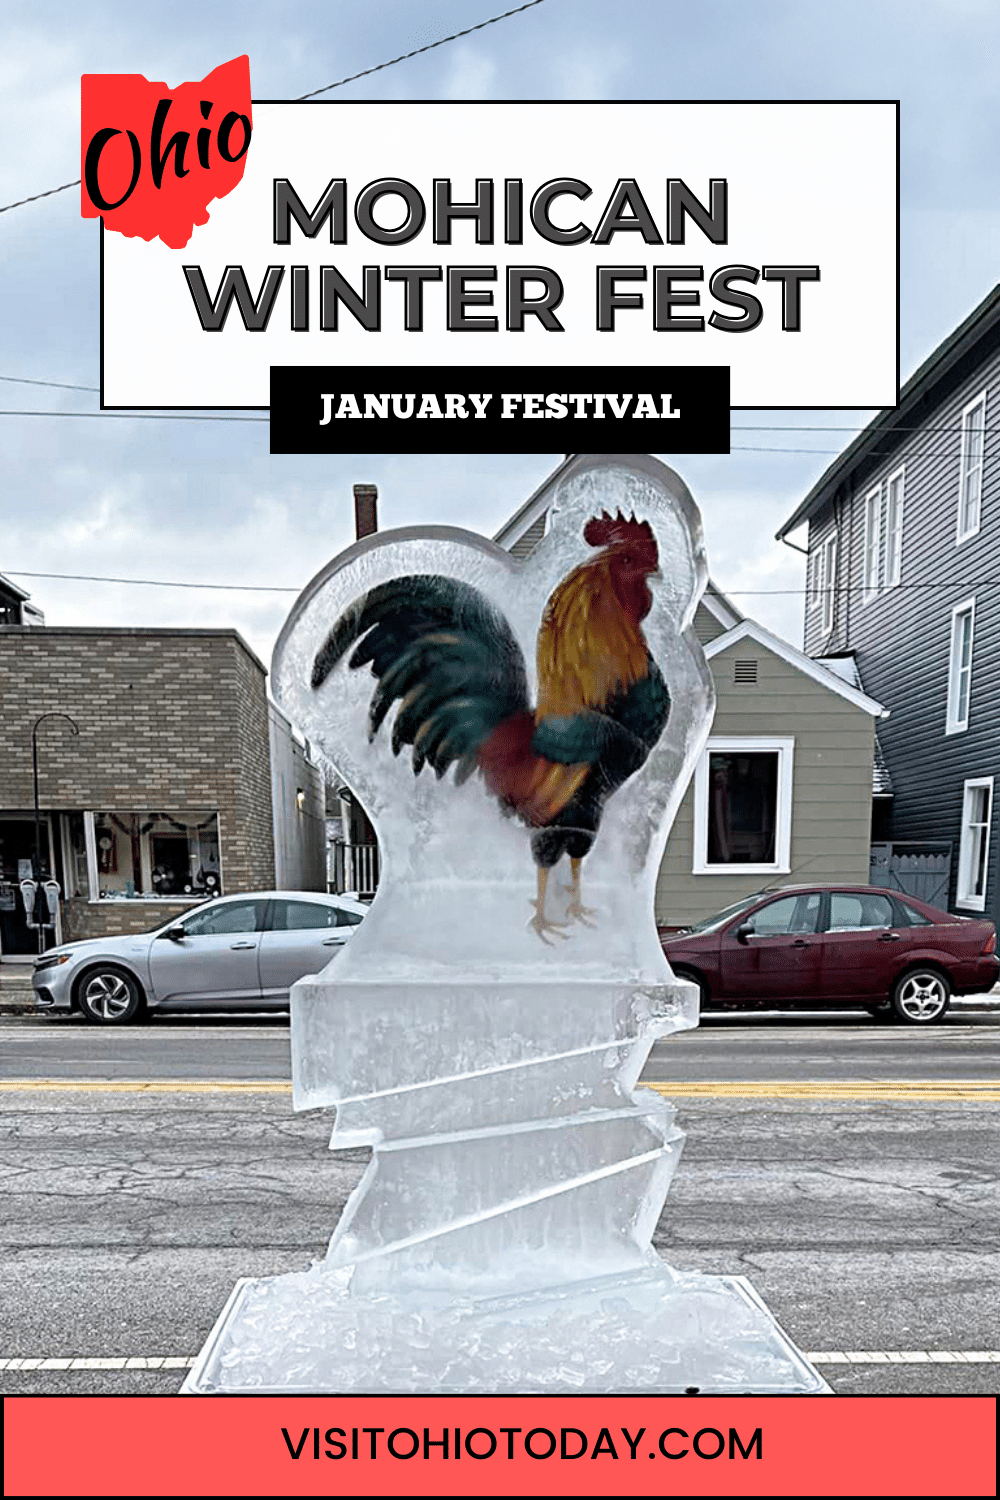 The Mohican Winter Fest is held in Loudonville and features ice sculpture displays all around the downtown area.